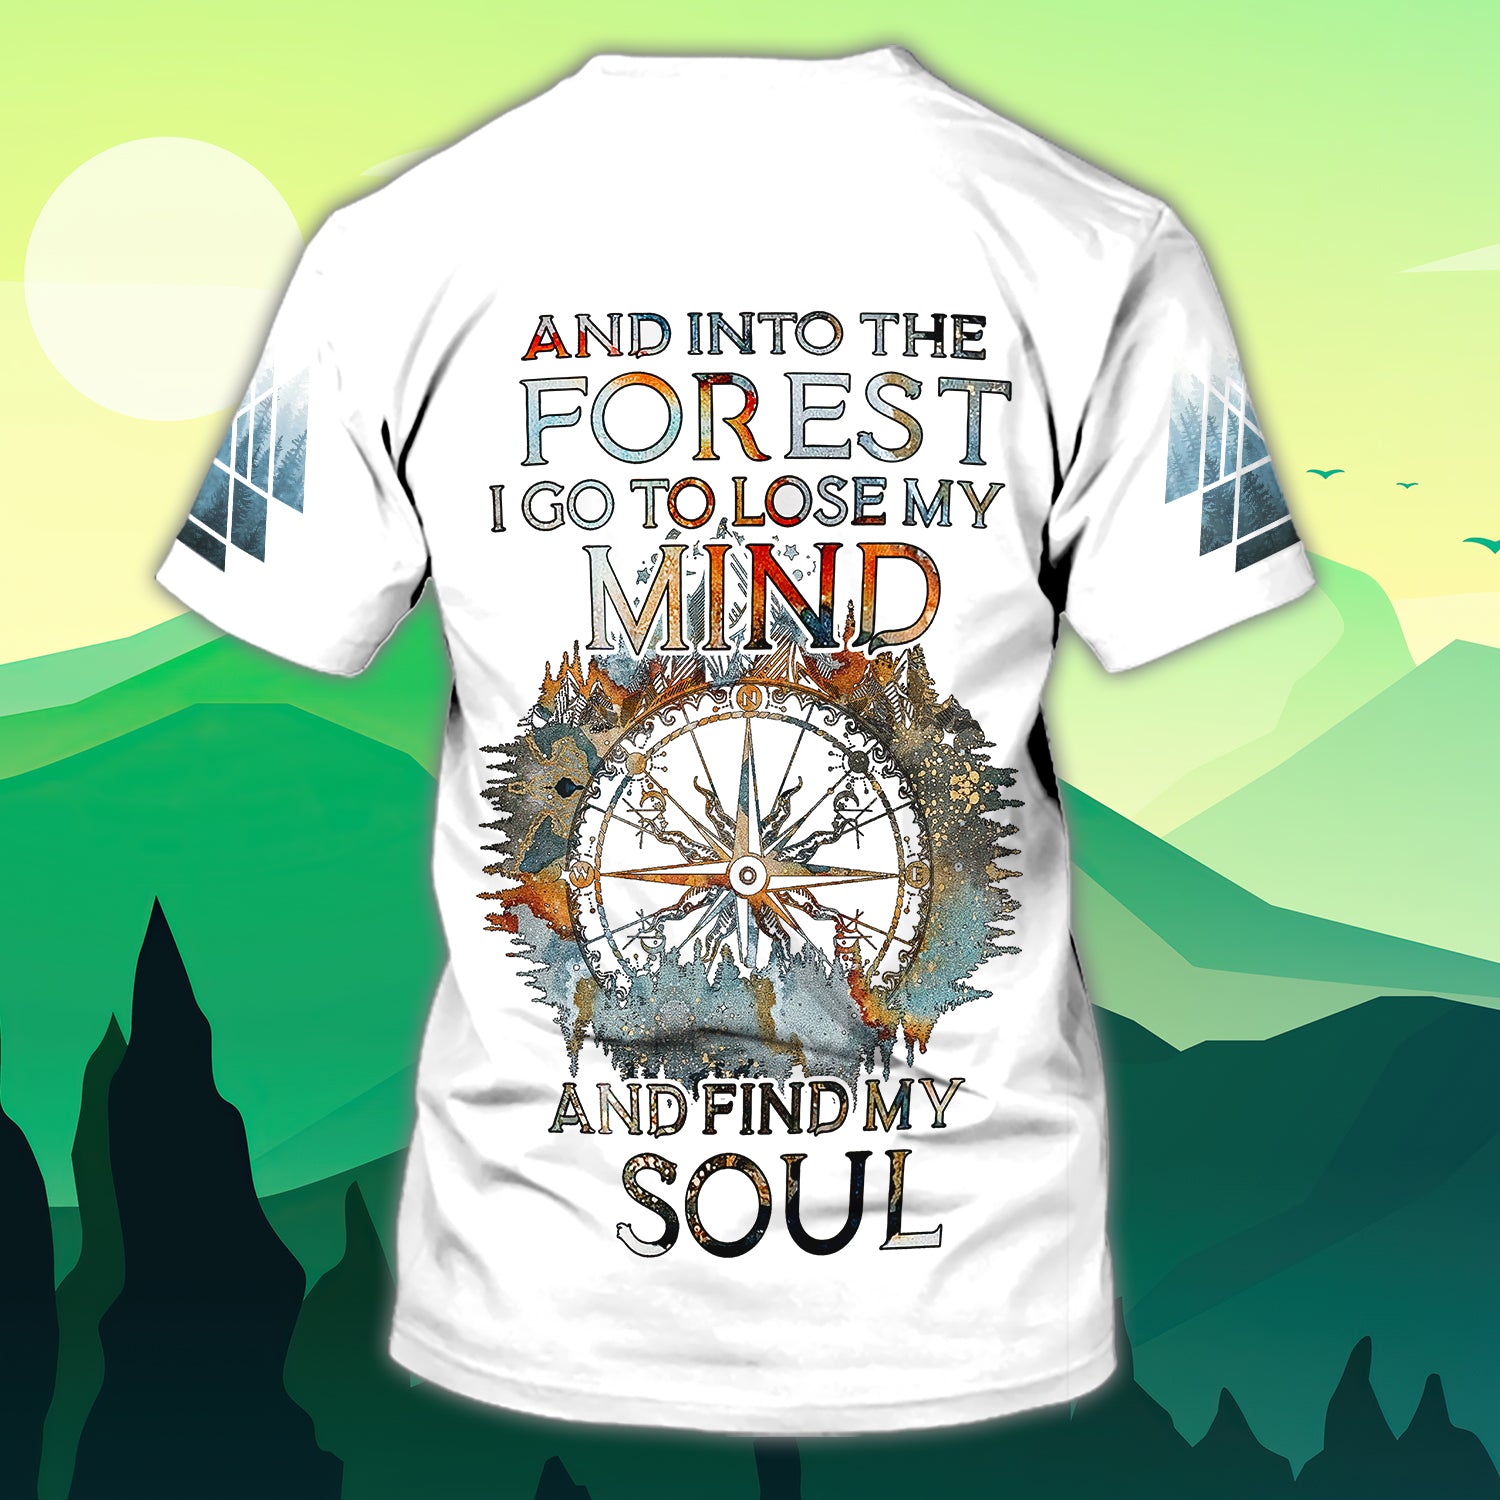 And Into The Forest I Go To Lost My Mind... - Personalized Name 3D T Shirt - Loop-T2k-178